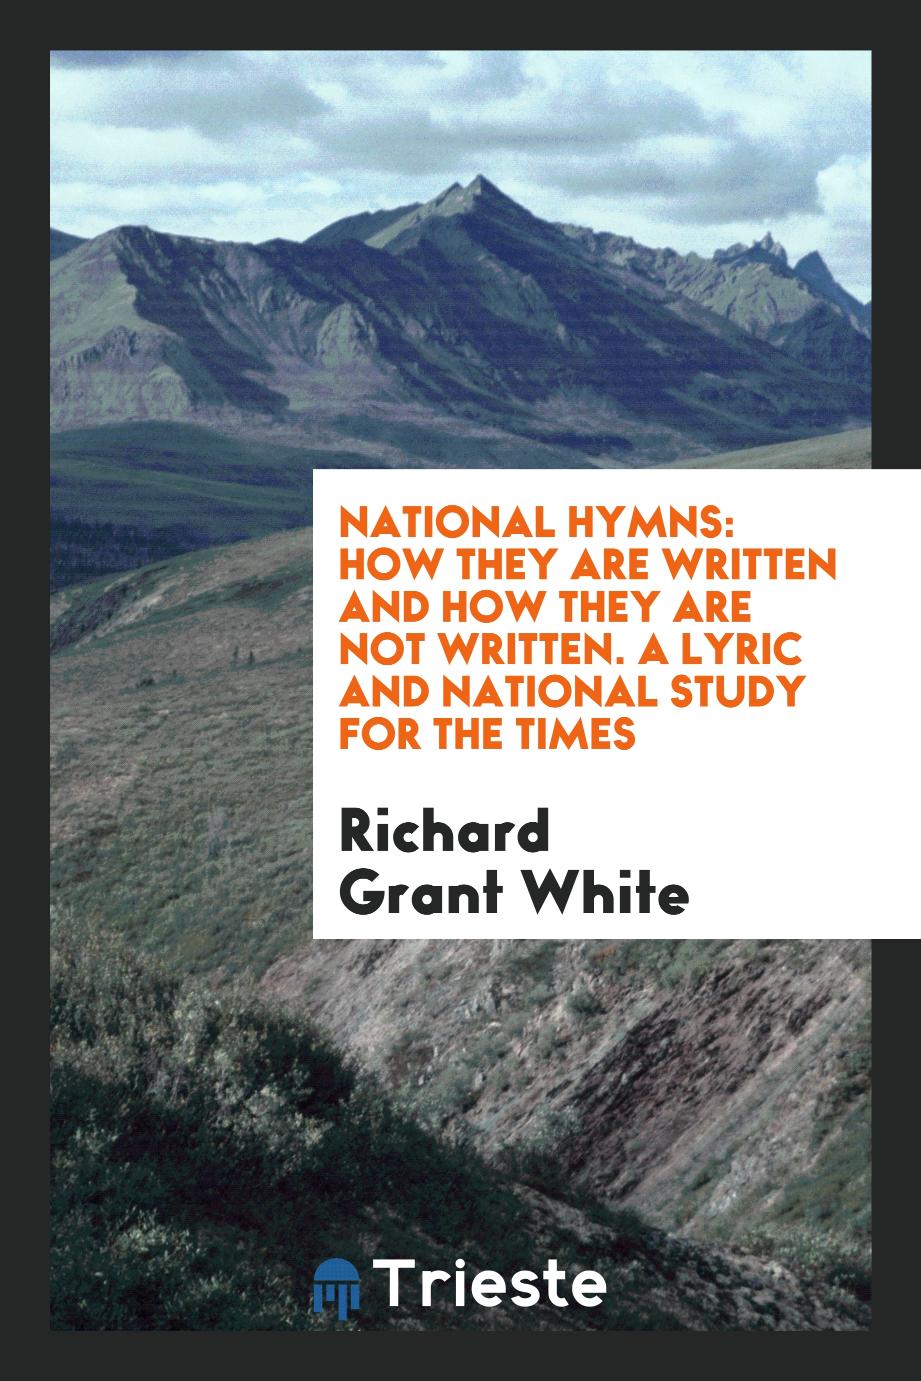 National Hymns: How They are Written and how They are Not Written. A Lyric and National Study for the Times